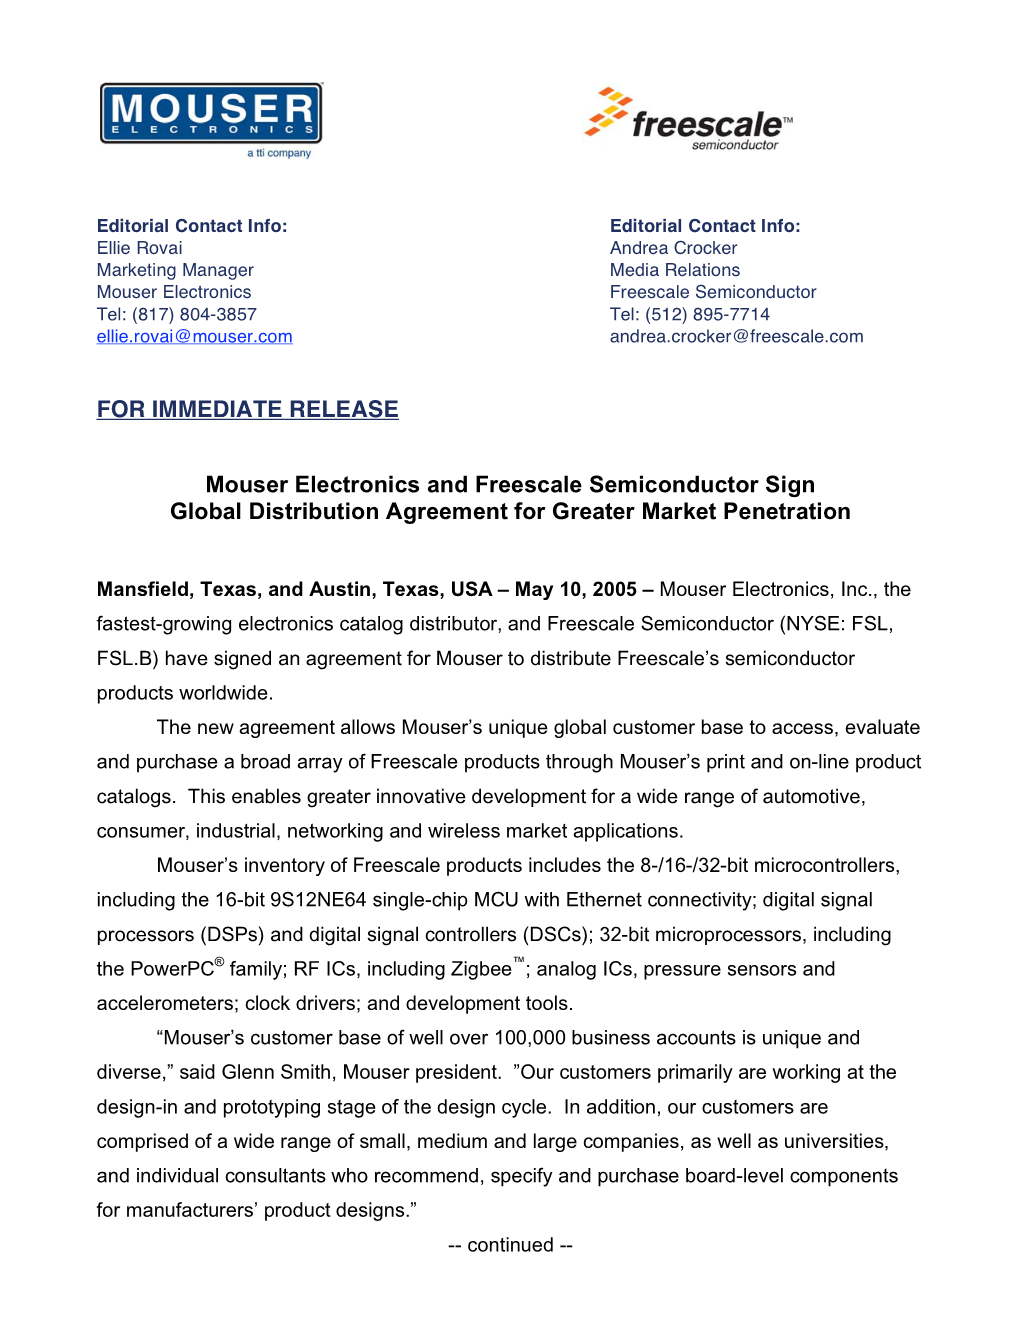 FOR IMMEDIATE RELEASE Mouser Electronics and Freescale